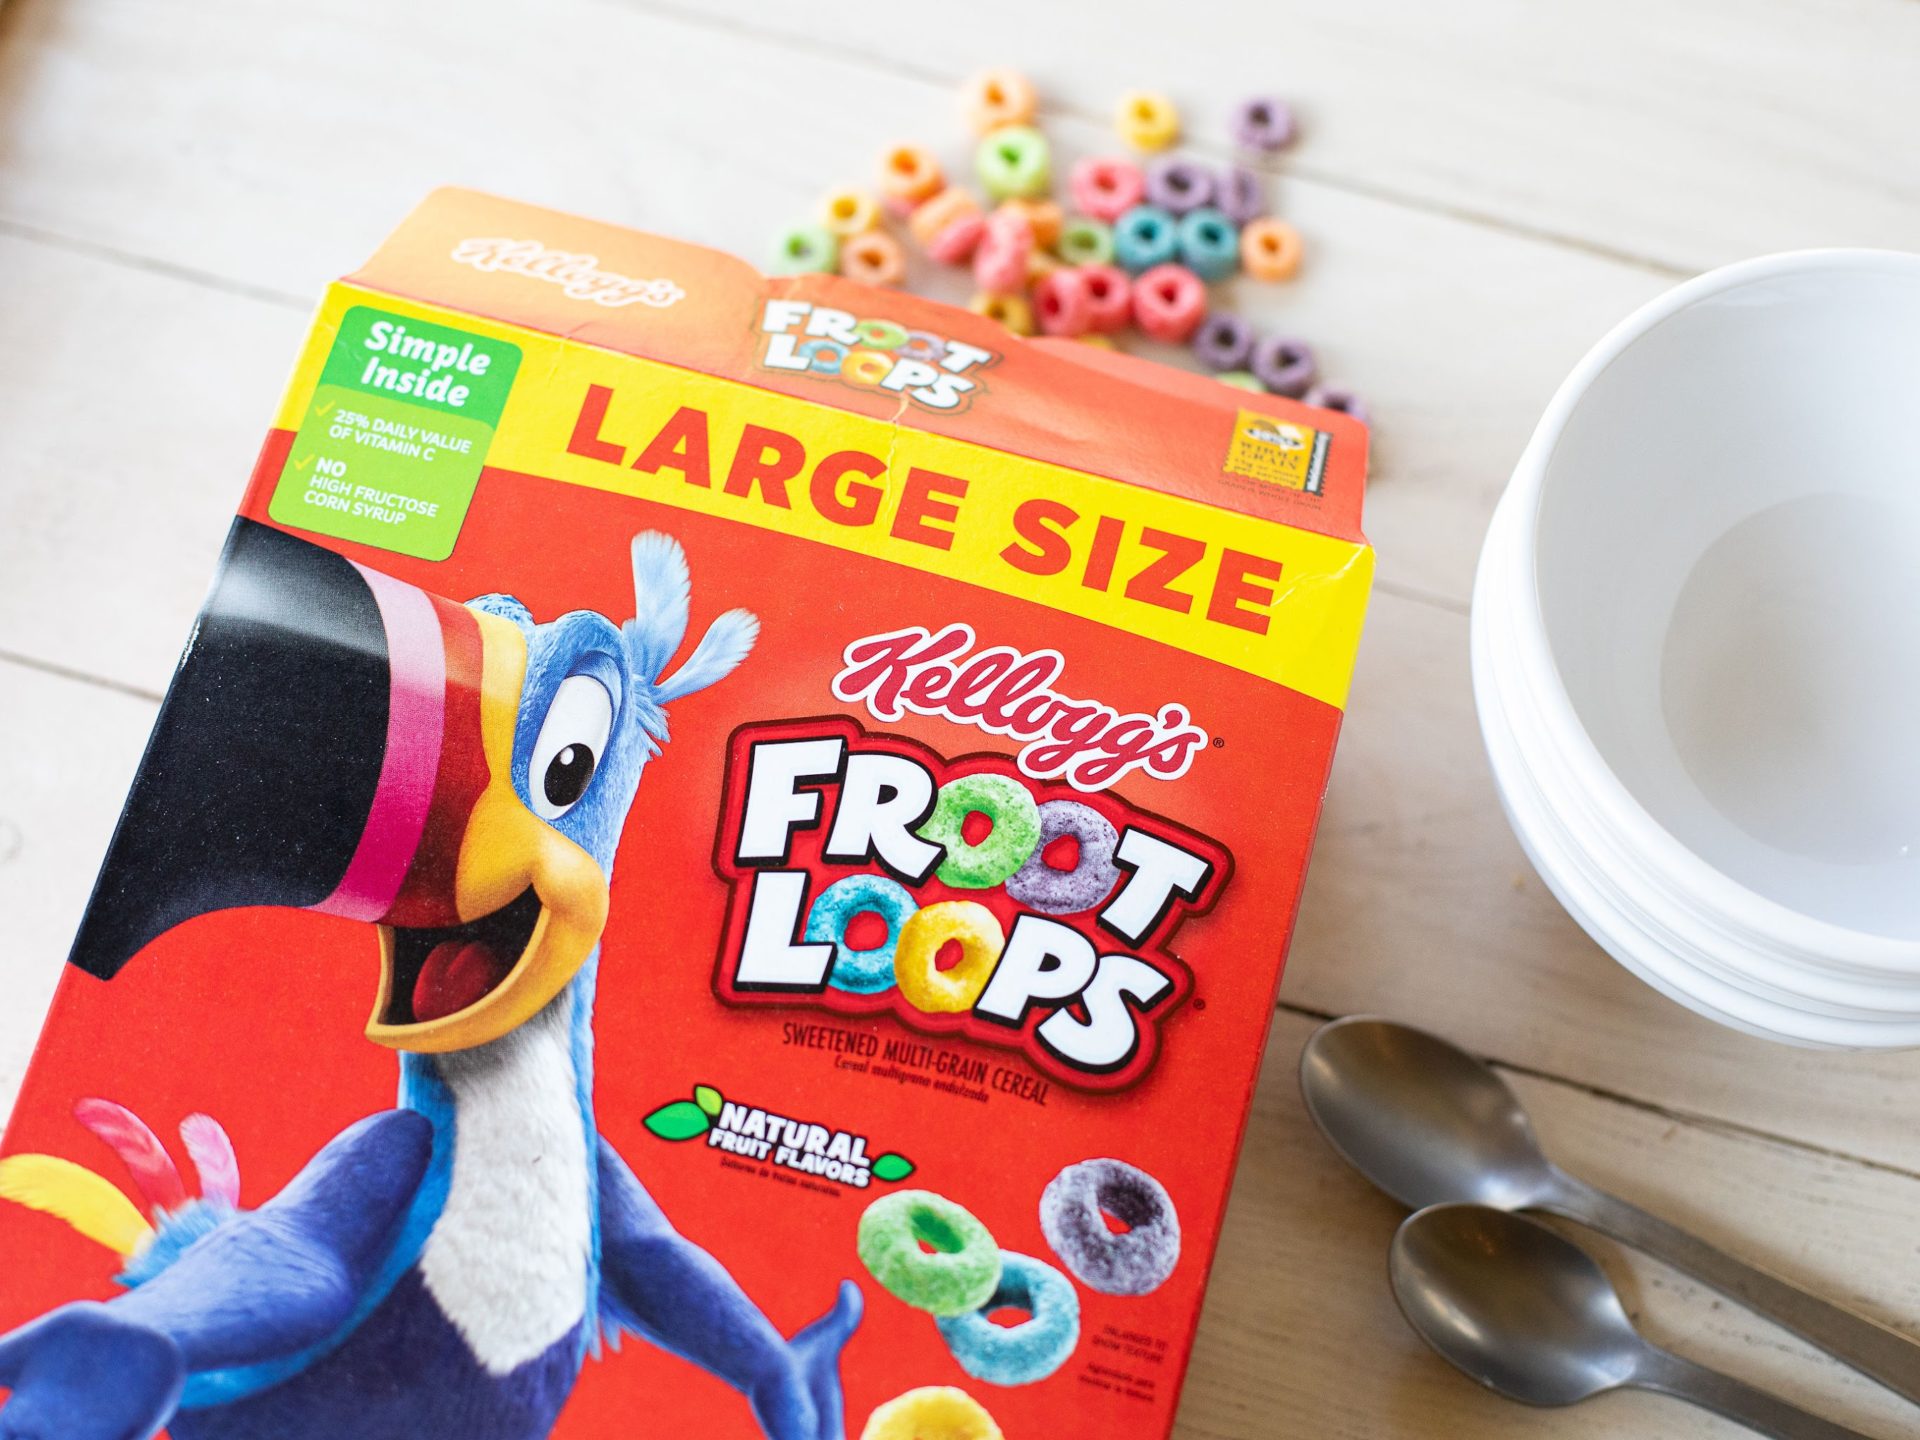 Large Size Boxes Of Kellogg’s Cereal As Low As $1.49 At Kroger With New Ibotta Offers